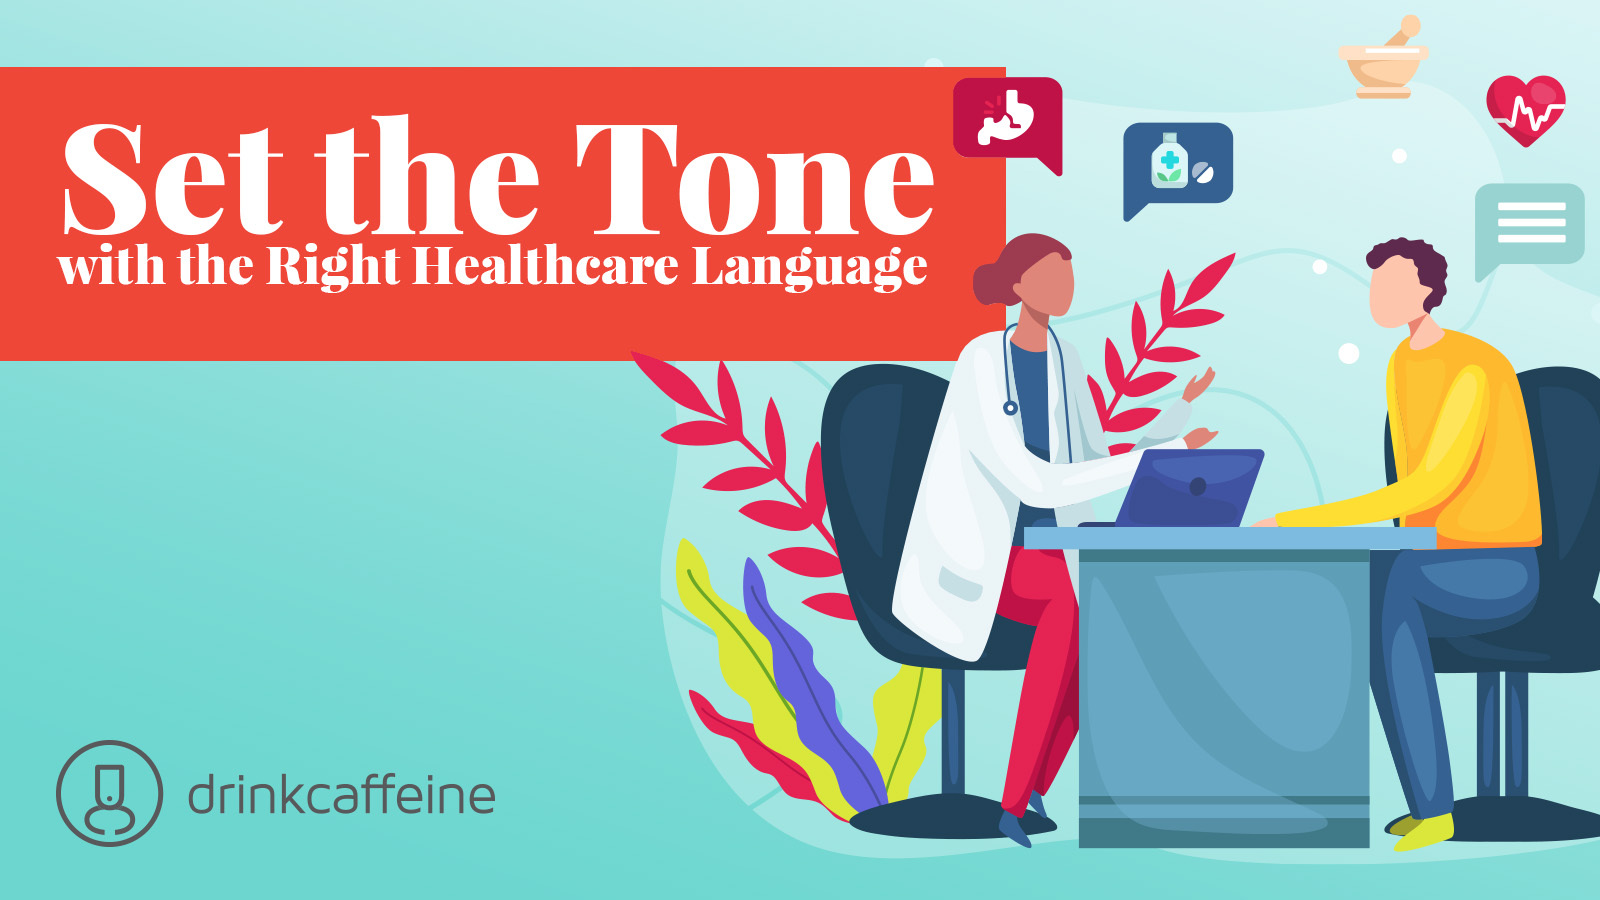 Healthcare marketers, be aware of how language initiates care expectations blog image